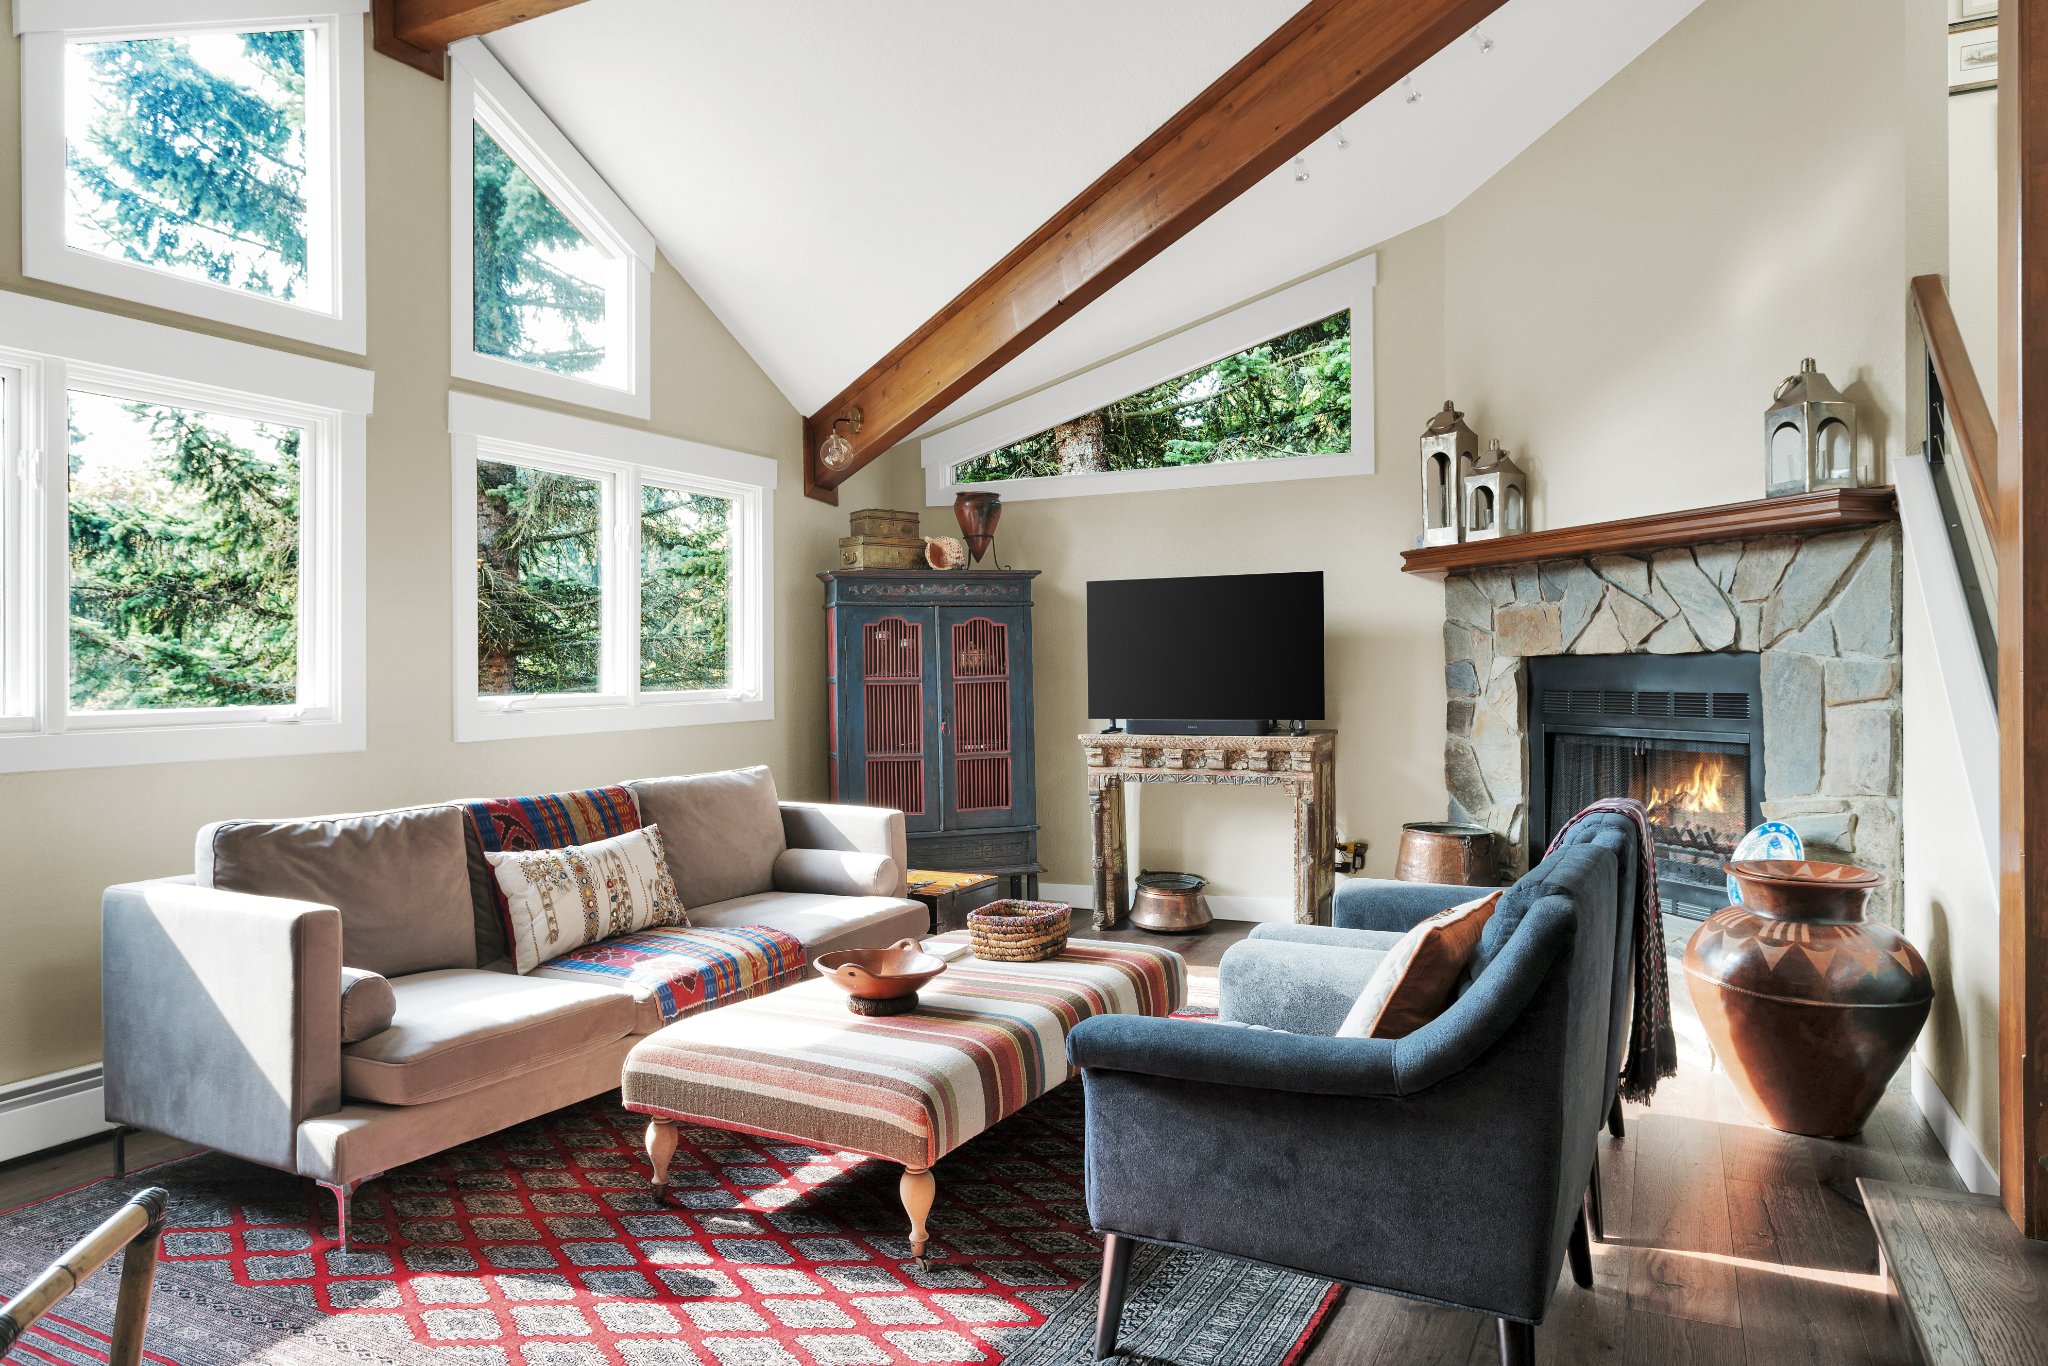 A vaulted ceiling and large windows create a luxurious living room space.